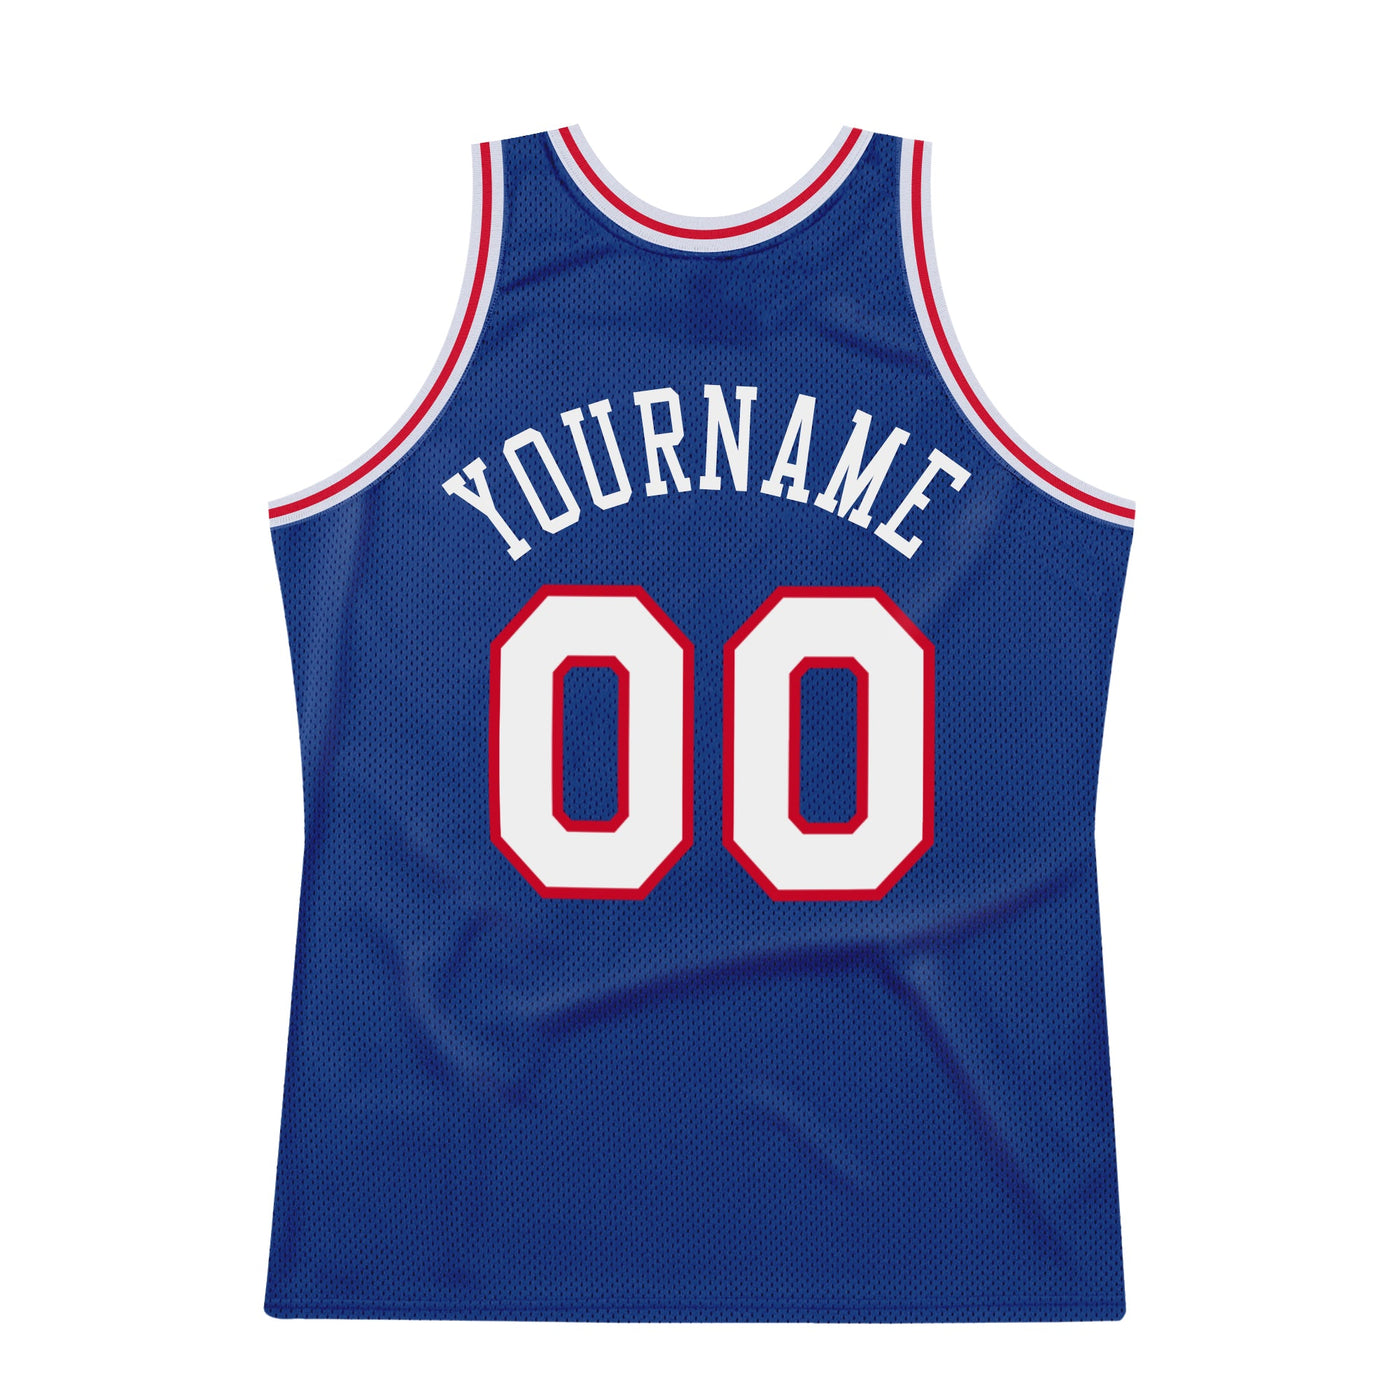 Custom Royal White-Red Authentic Throwback Basketball Jersey